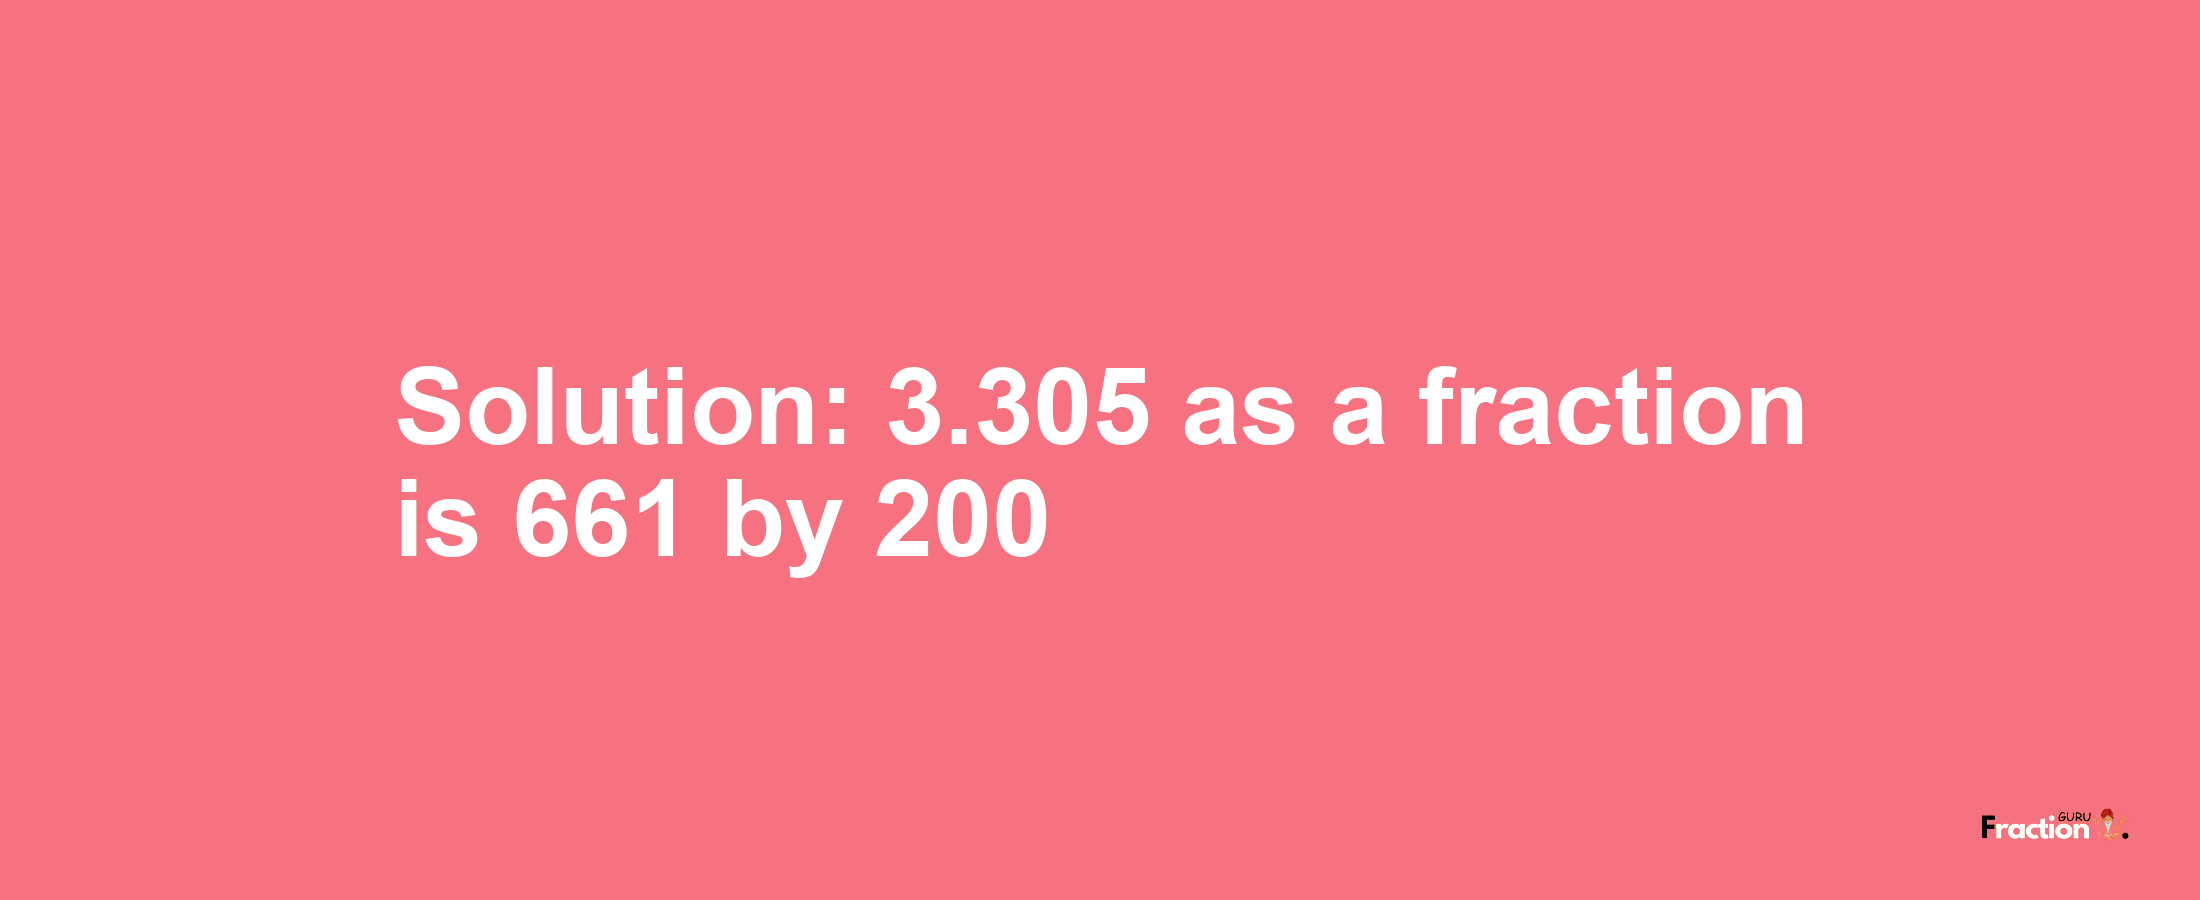 Solution:3.305 as a fraction is 661/200